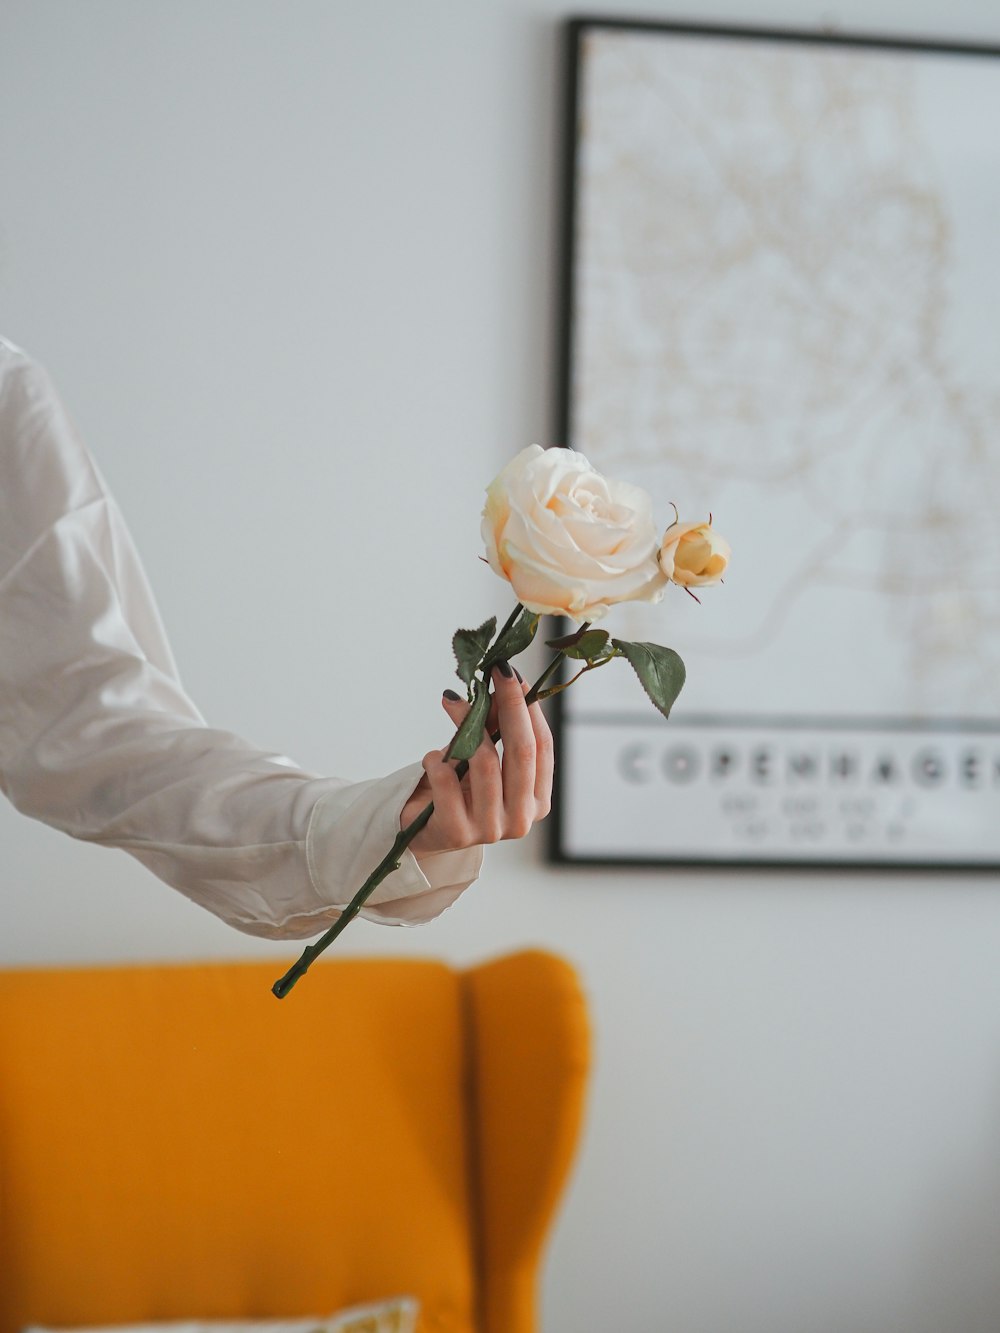 a person holding a white rose in their hand